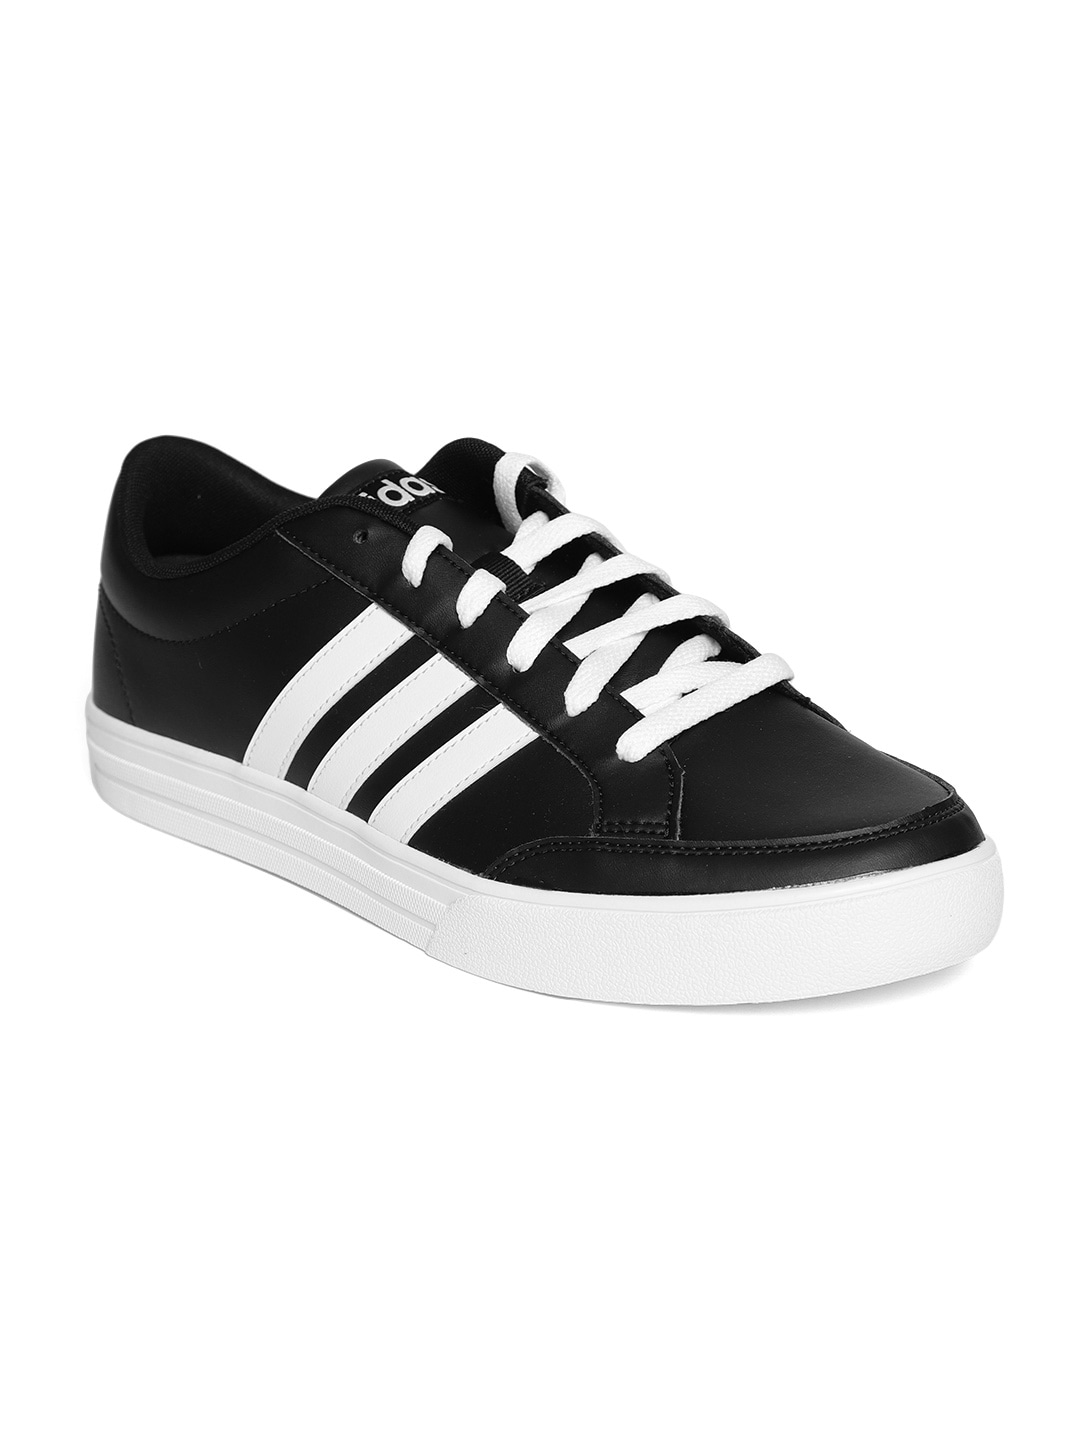 Adidas Response Approach Str Black Tennis Shoes for Men online in India ...